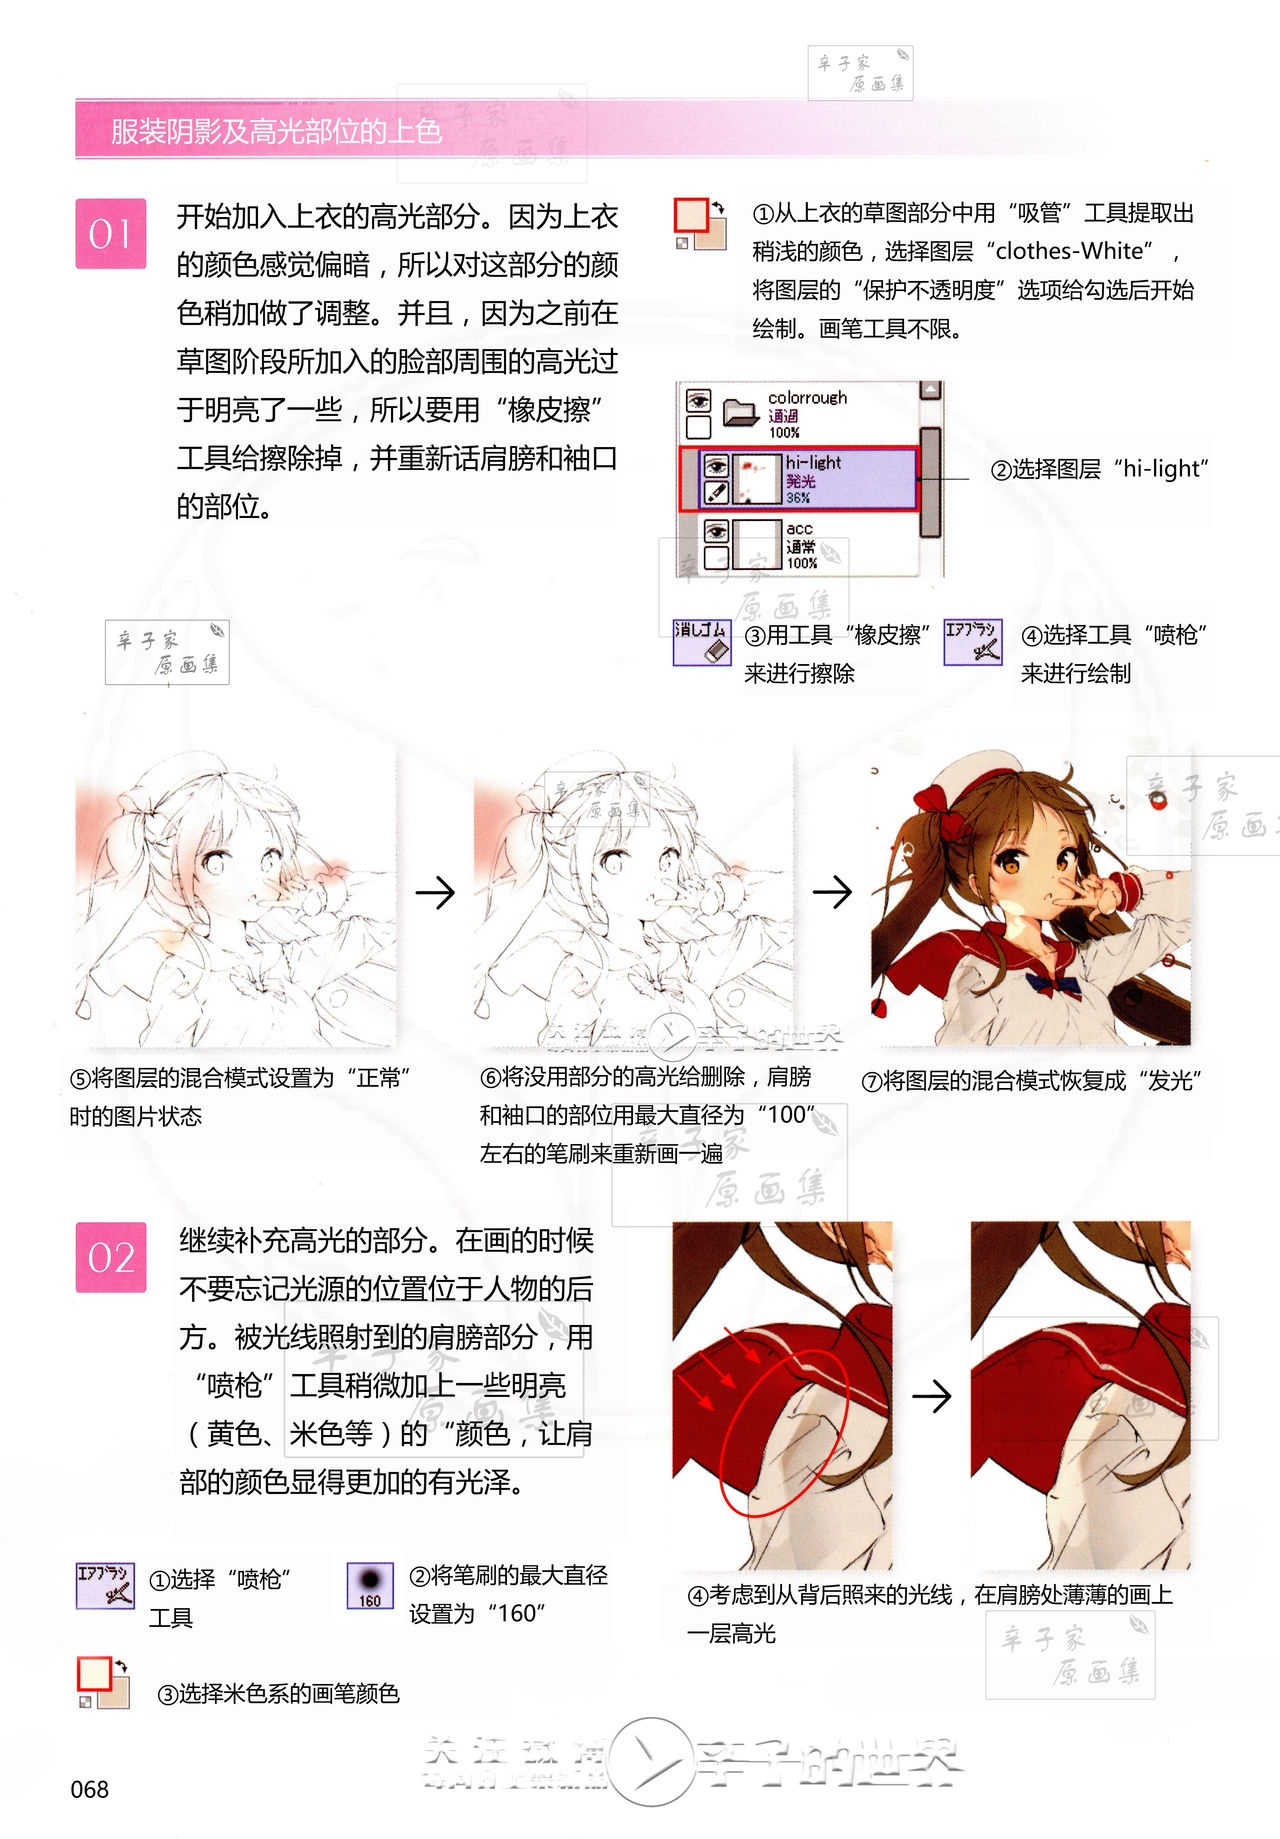 [Anmi] Lets Make ★ Character CG illustration techniques vol.9 [Chinese] 66